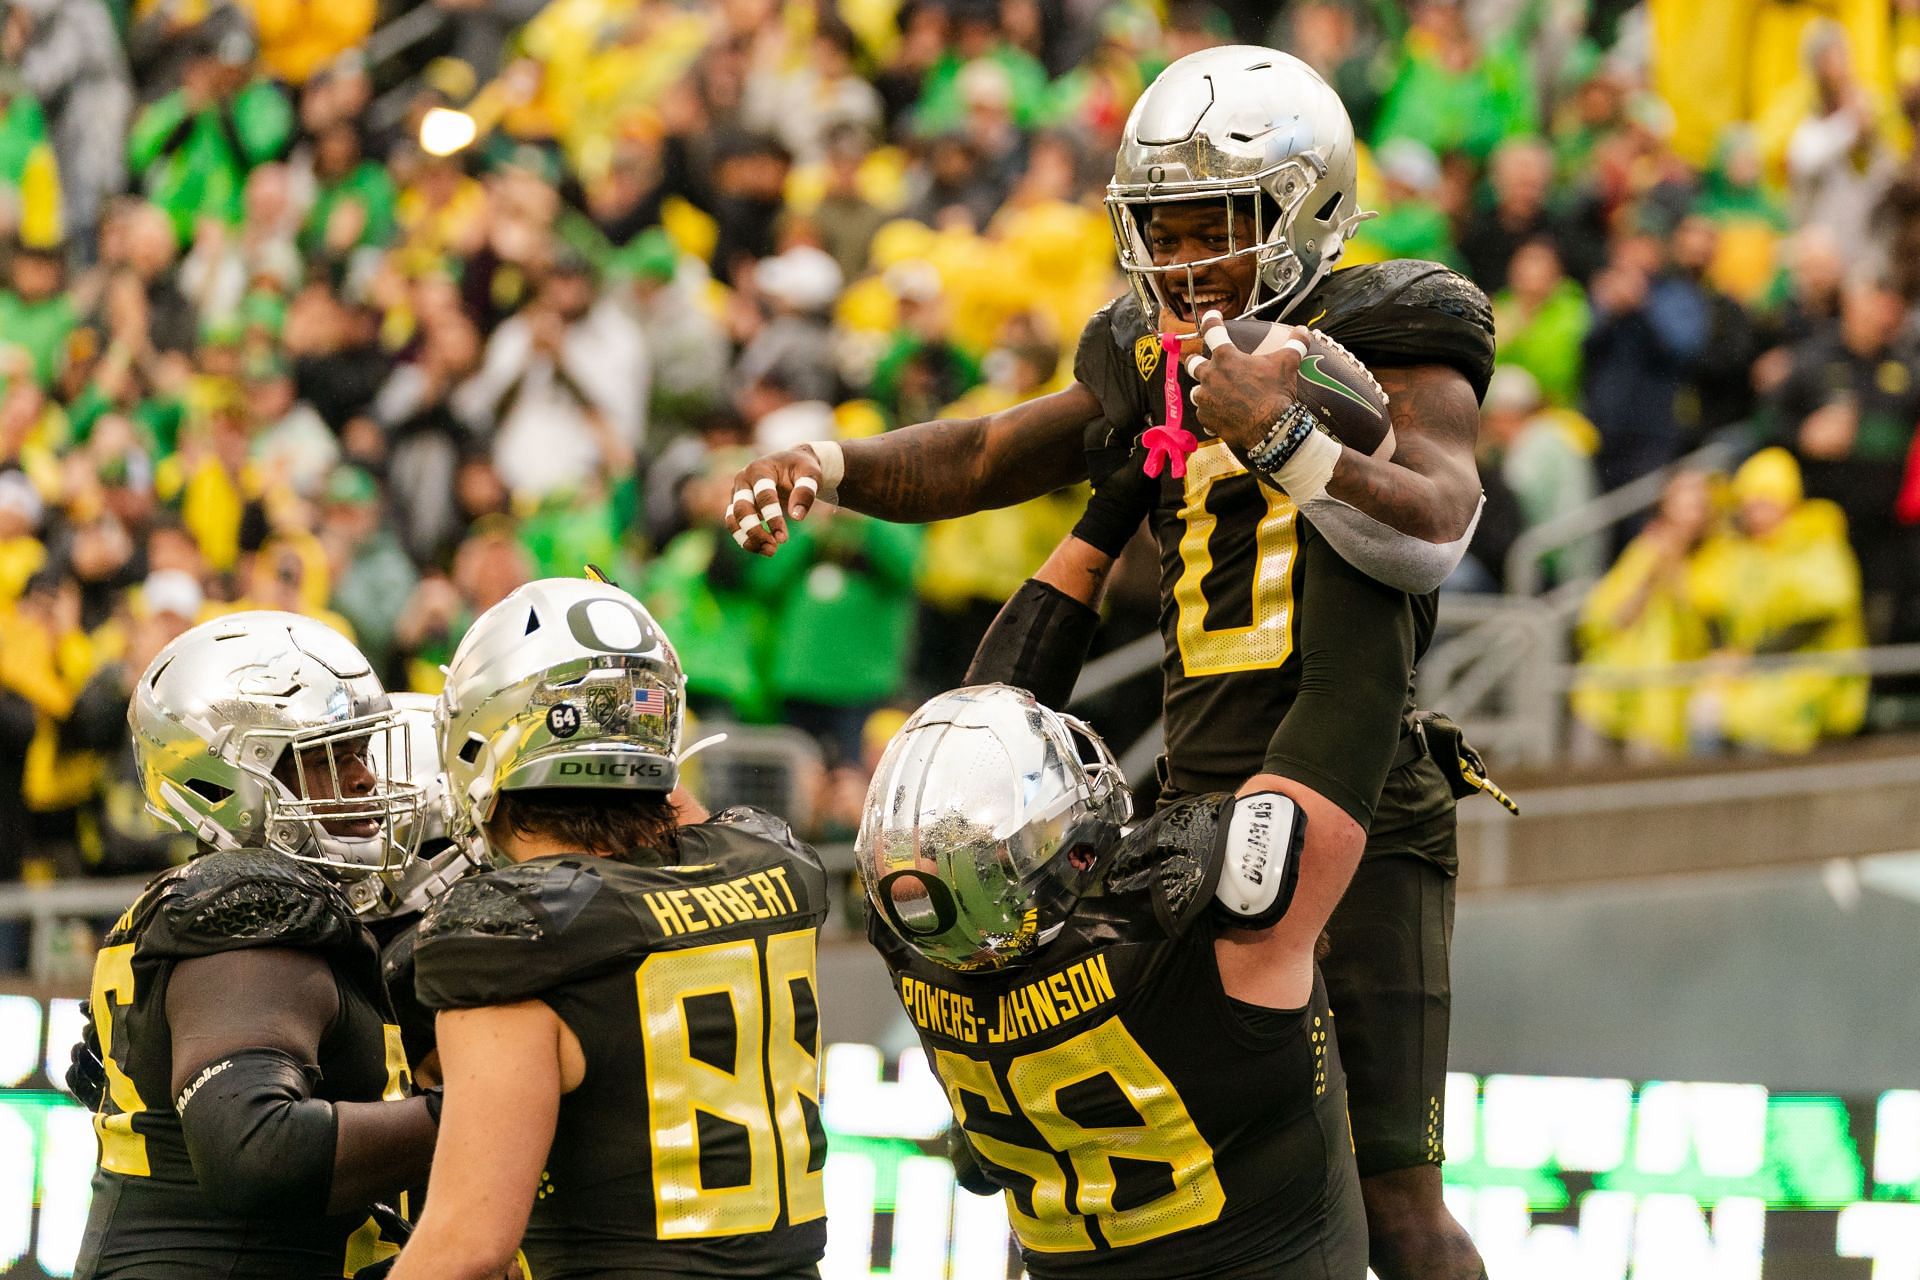 Jackson Powers-Johnson #58 of the Oregon Ducks lifts up Bucky Irving #0 after his touchdown during the second half of the game against the California Golden Bears